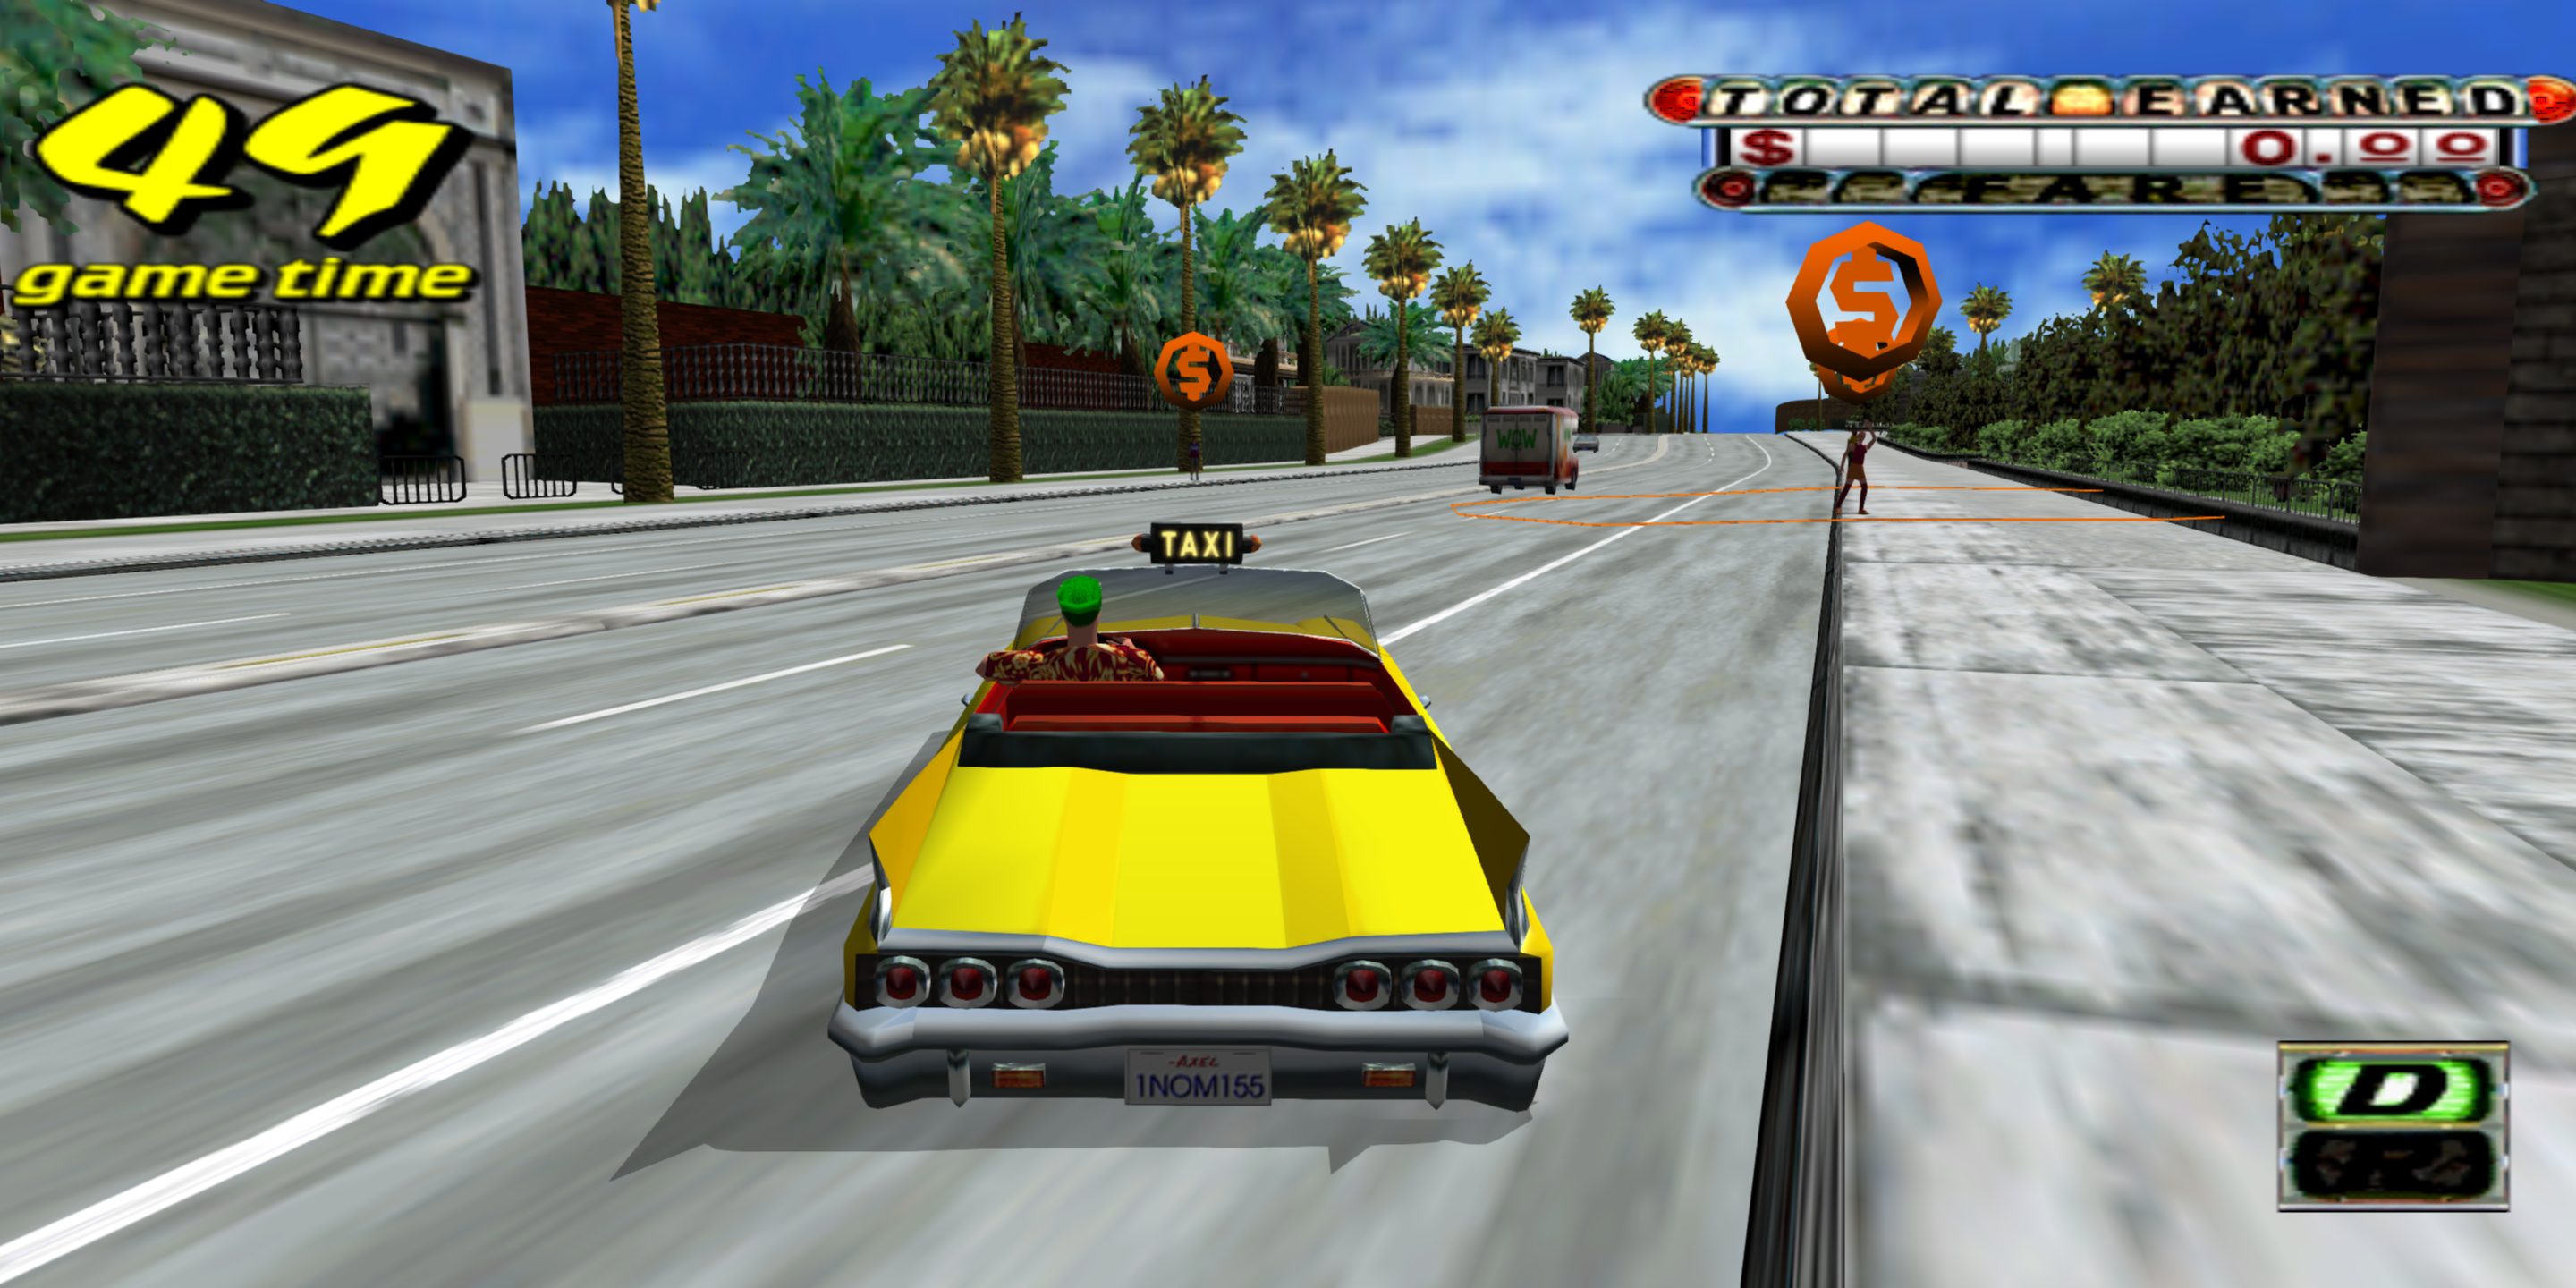 Gameplay from Crazy Taxi.